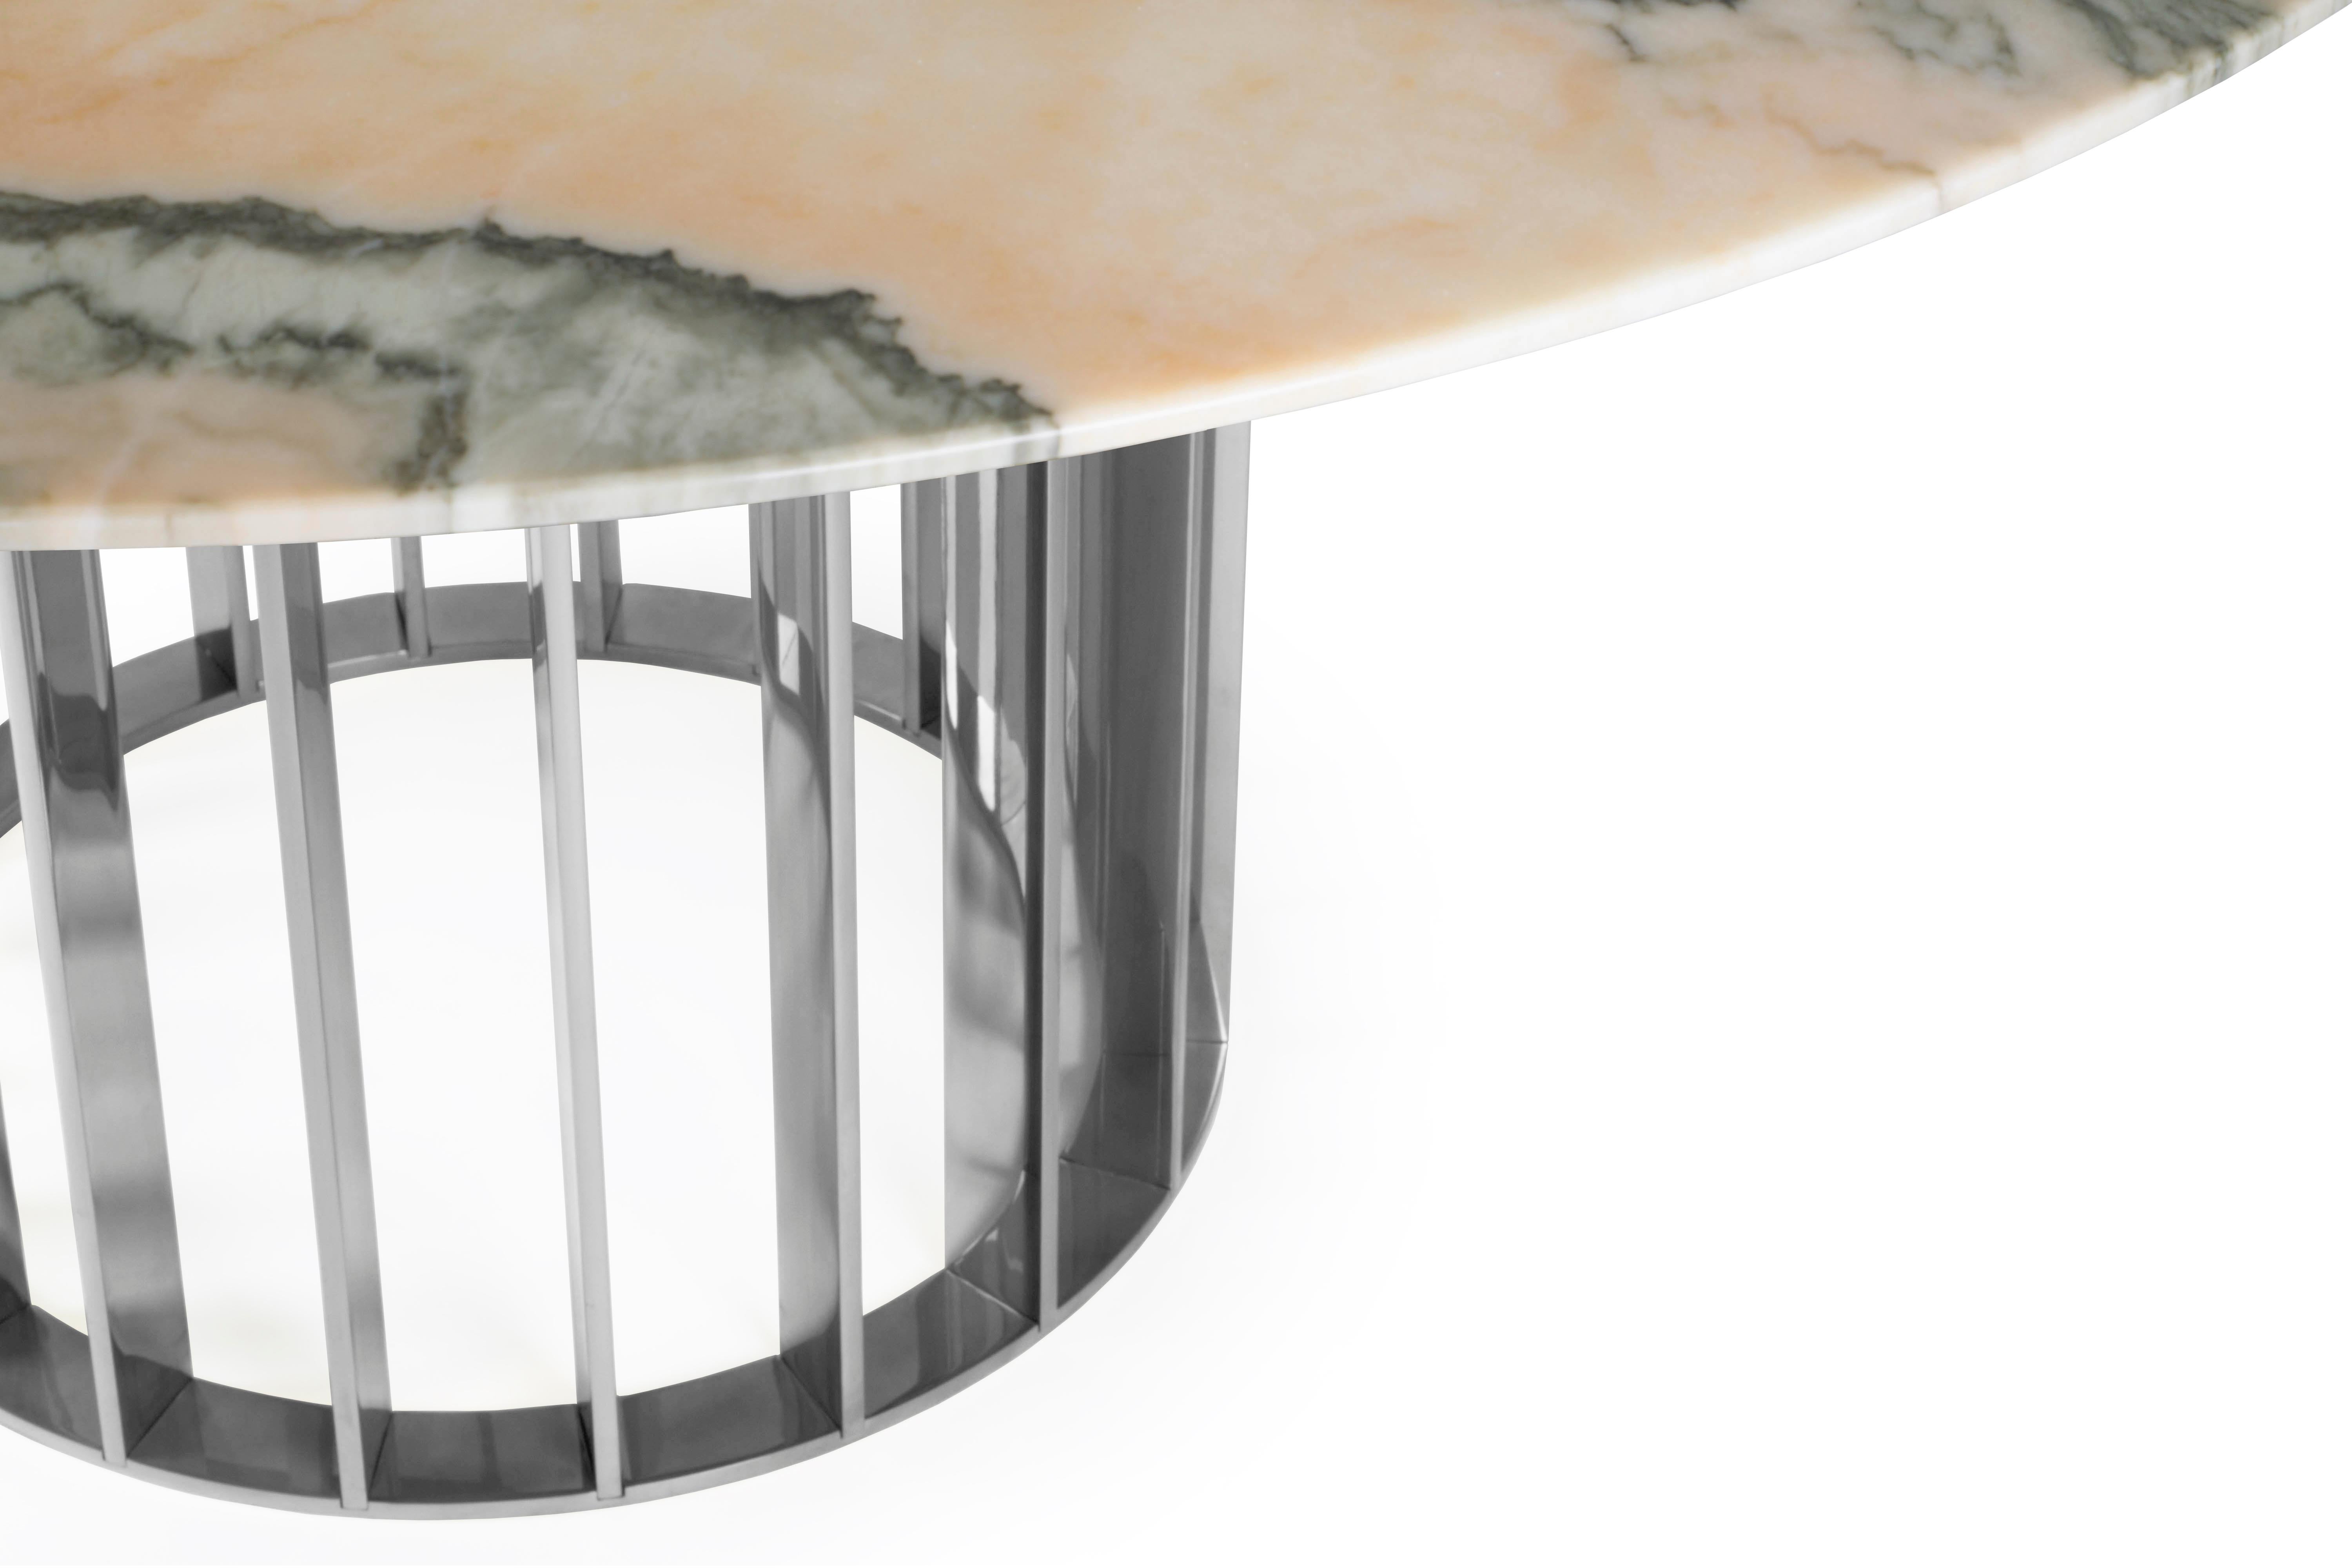 This unique dining table uses gorgeous rose marble top and elegant and modern stainless steel base uses the repetition of metal stripes to bring rhythm to the base. Its design is simple but full of grace and WOW factor. 
The best craftsmanship was